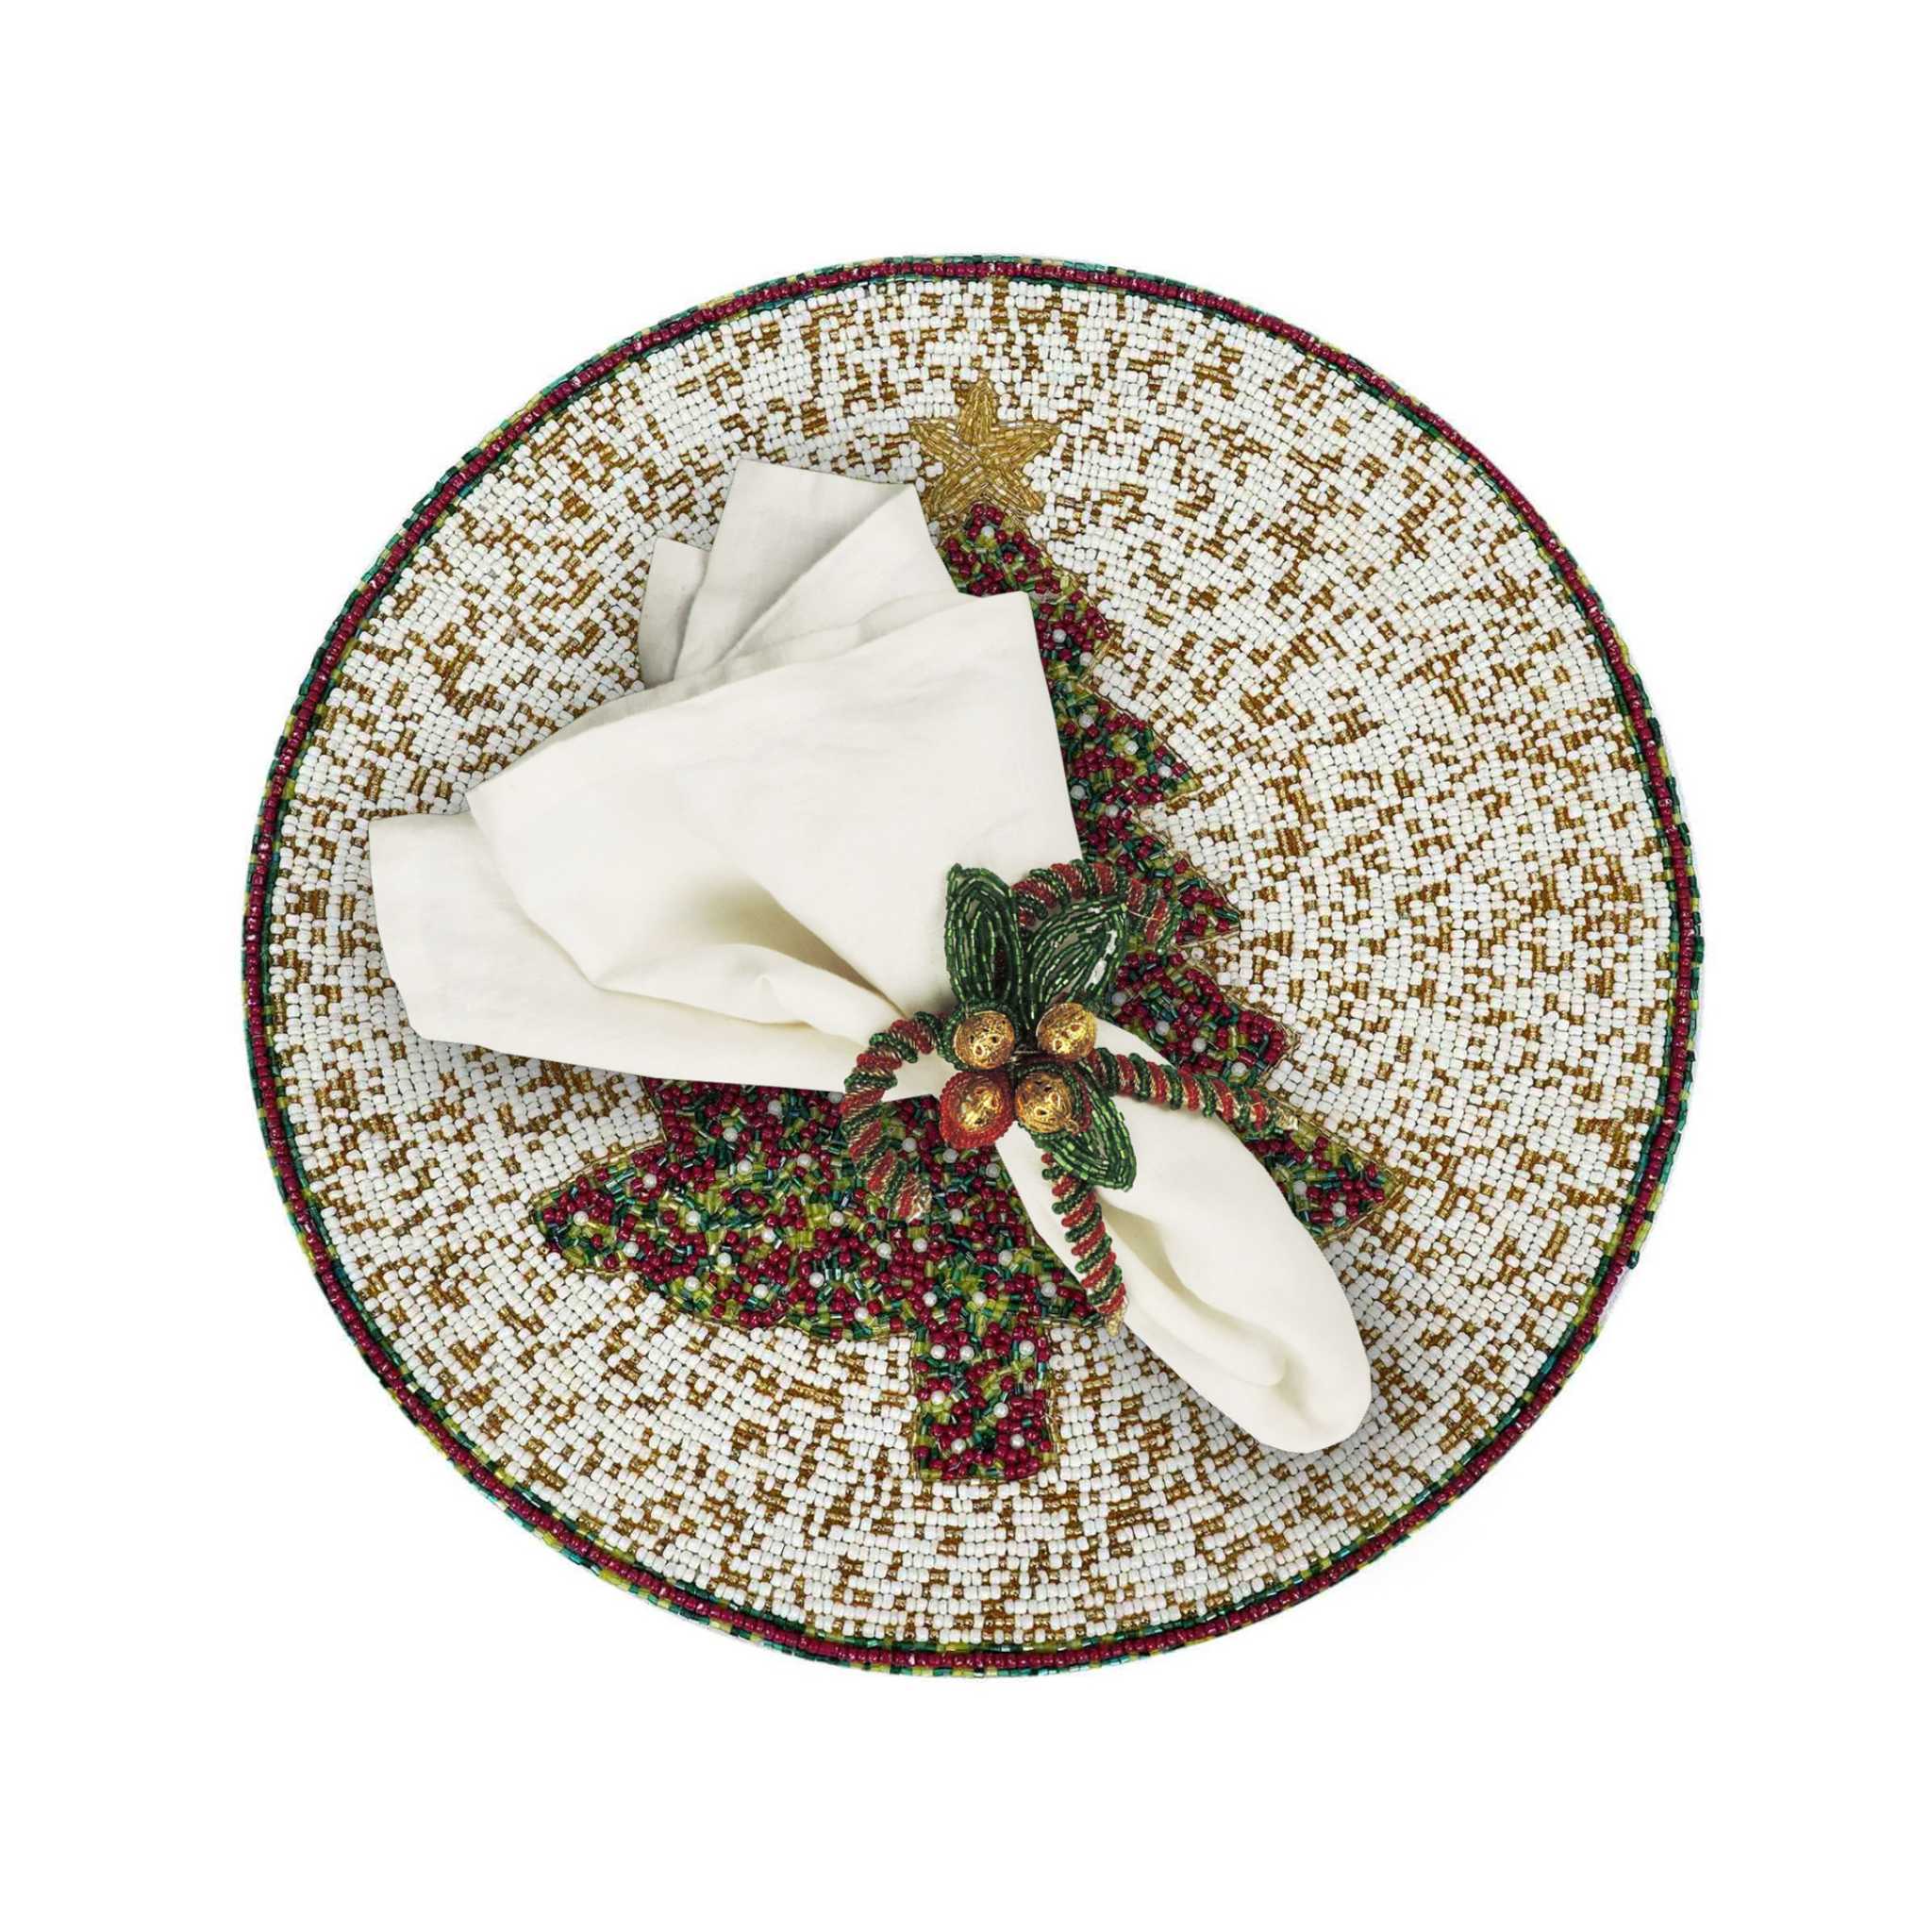 Fir Sure Bead Embroidered Placemat<br>Color: Cream, Red & Green<br>Size: 13.5" Round<br>Set of 2/4